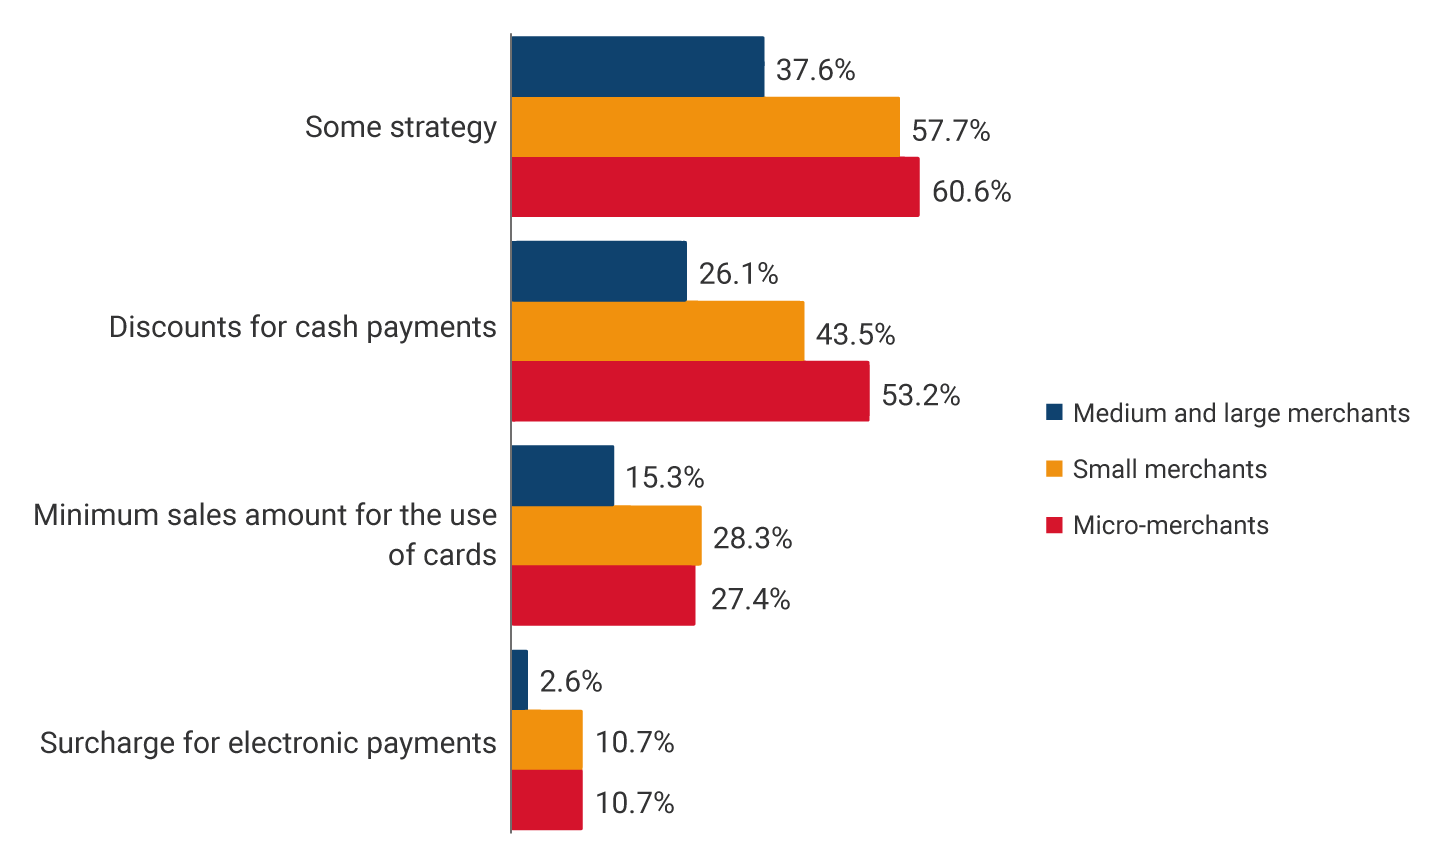 Some strategy: medium and large businesses, 37.6%; small businesses, 57.7%; micro-businesses, 60.6%. Discounts for cash payment: medium and large businesses, 26.1%; small businesses, 43.5%; micro-businesses, 53.2%. Minimum sale amount for the use of cards: medium and large businesses, 15.3%; small businesses, 28.3%; micro-businesses, 27.4%. Surcharge for payments with electronic means: medium and large businesses, 2.6%; small businesses, 10.7%; micro-businesses, 10.7%.